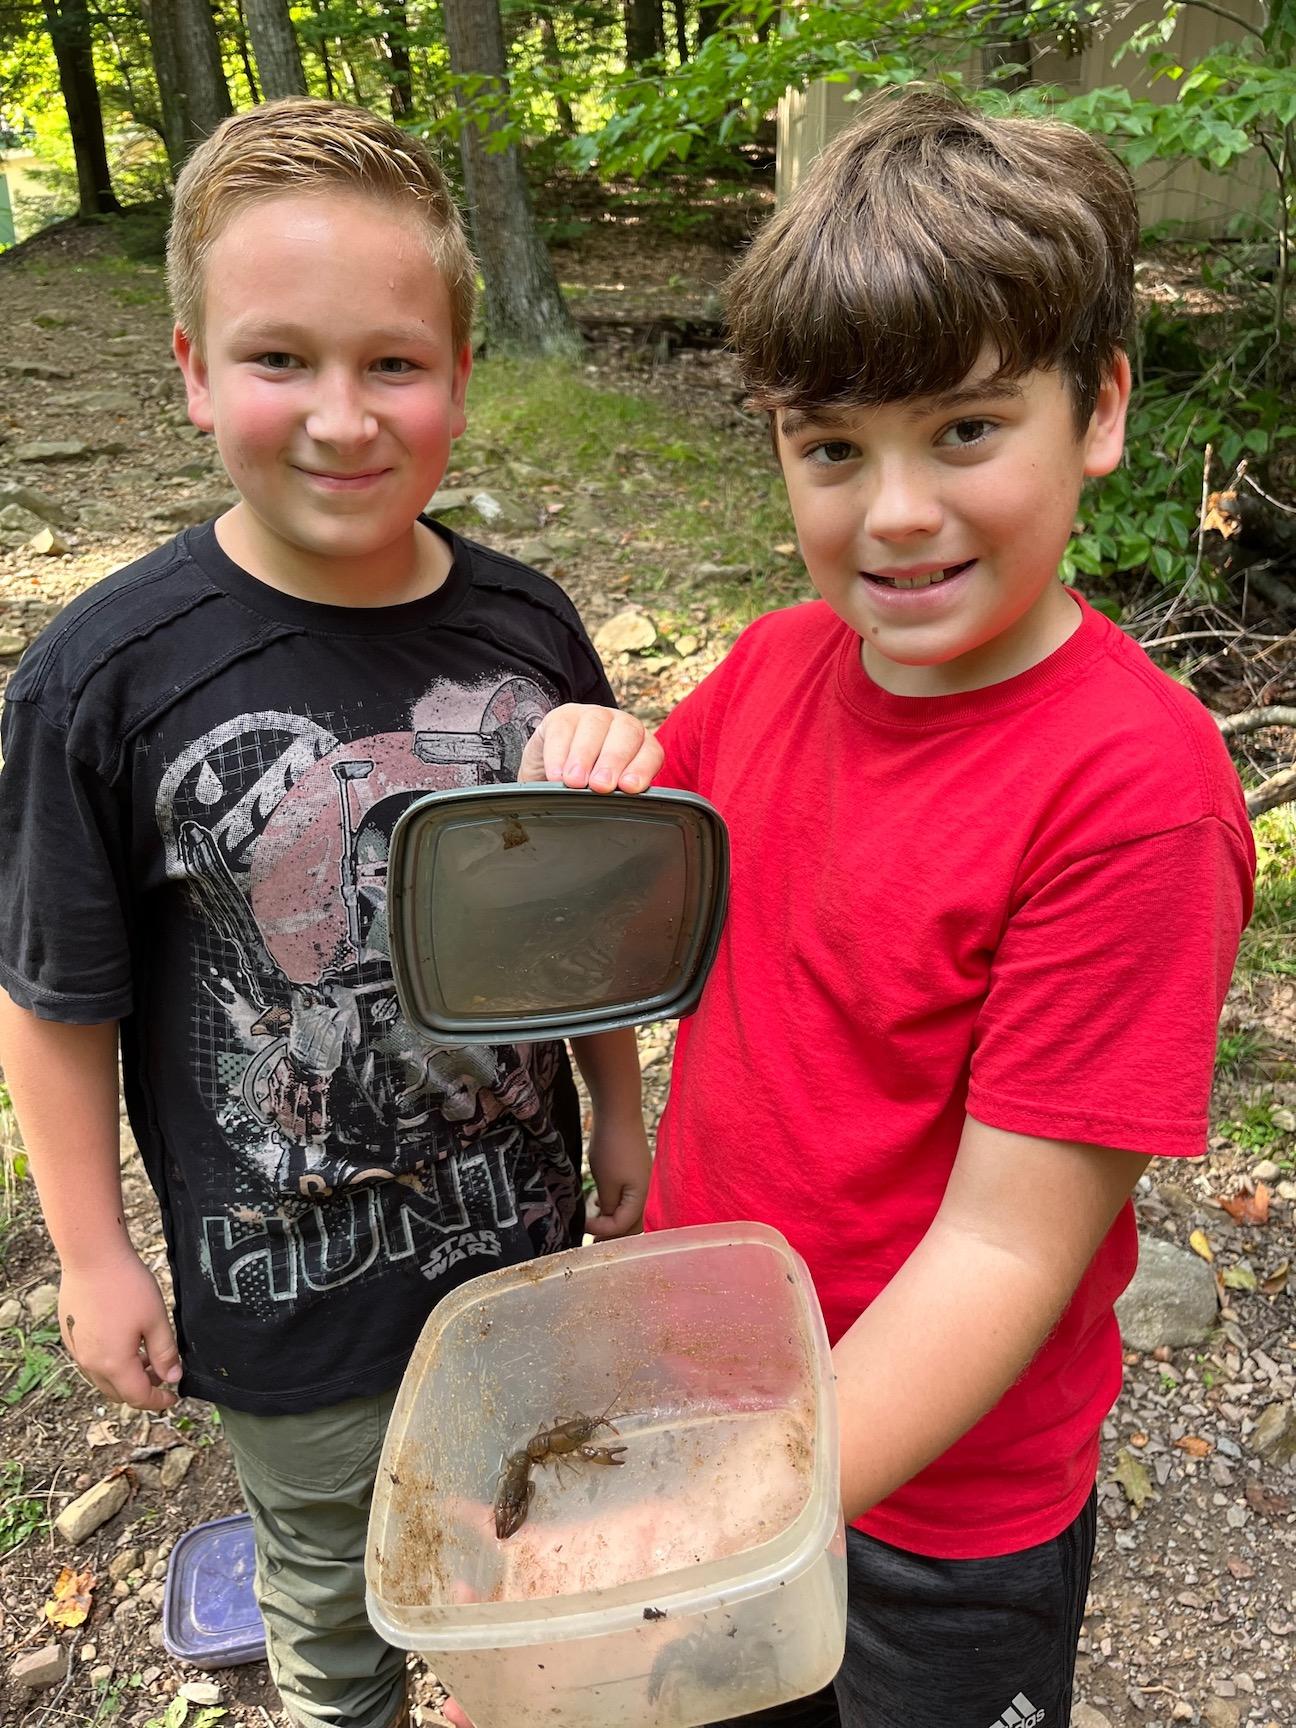 Ben Nicolosi and Zach Roland from McCullough know the best place to find creatures is under rocks in the creek